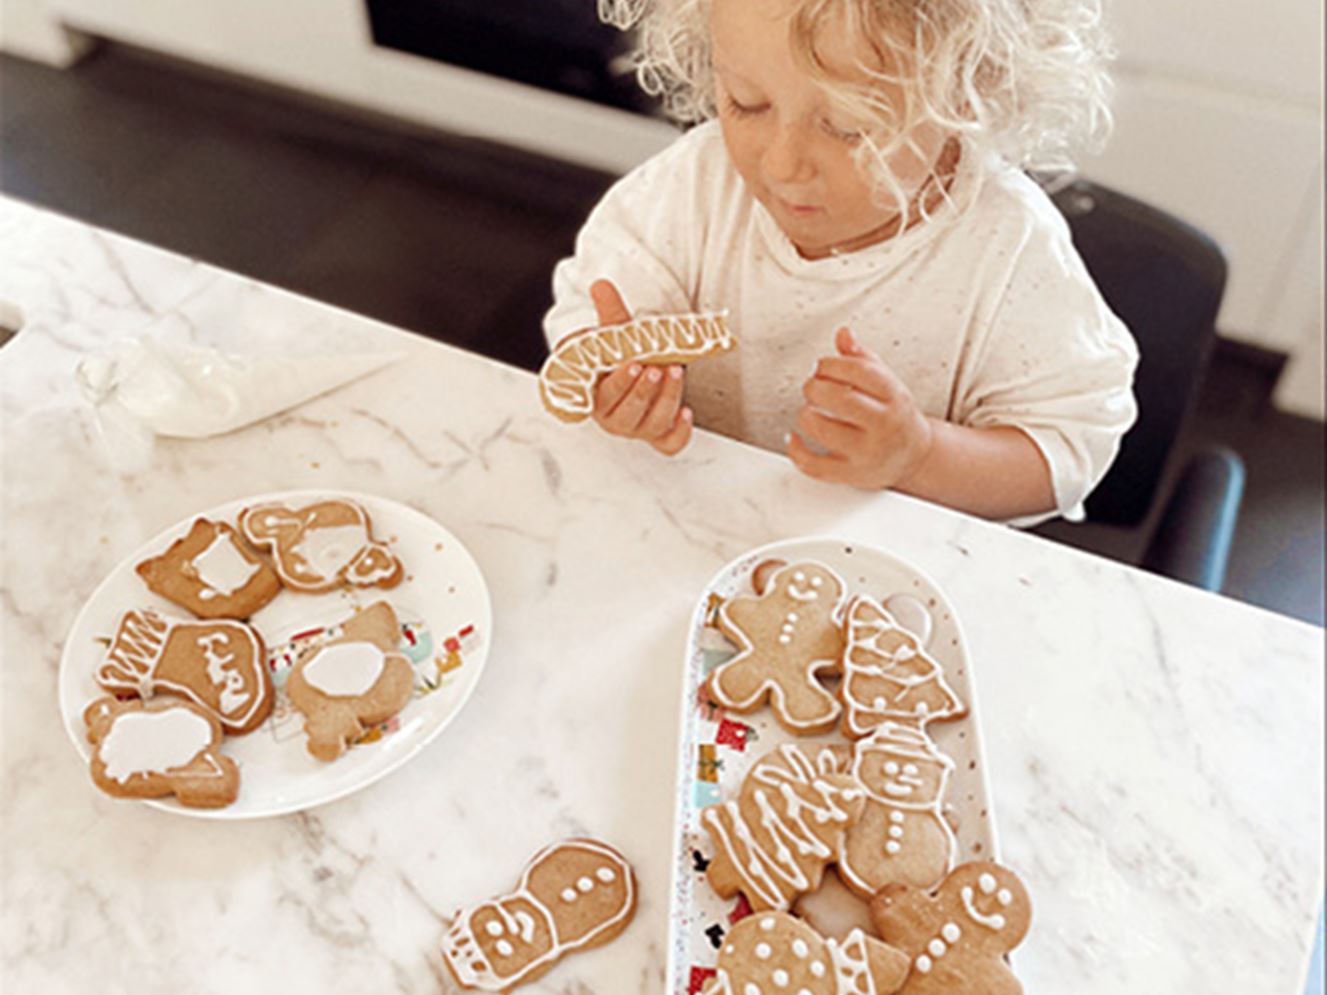 Toddler at kitchen bench eats a Christmas gingerbread cookie.